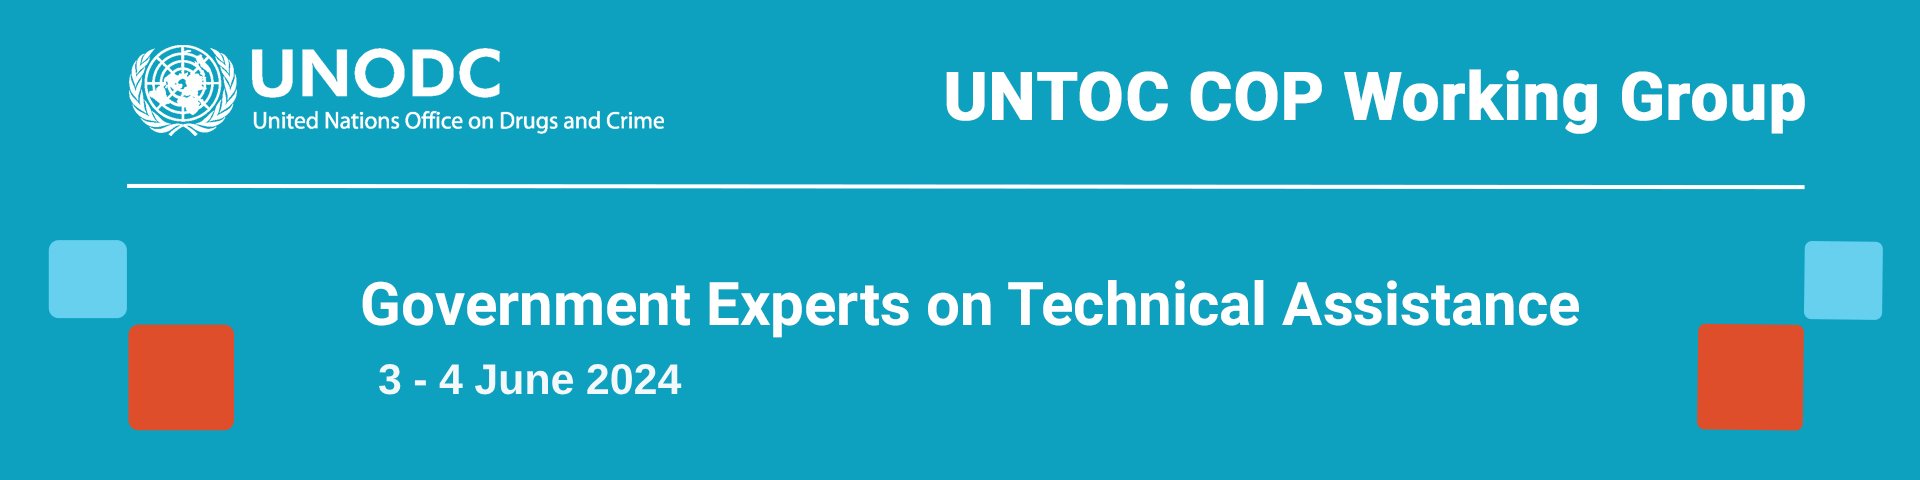 Visual with the logo of UNODC. The following text appears on the visual: "UNTOC COP Working Group - Government Experts on Technical Assistance - 29-30 May 2023". 